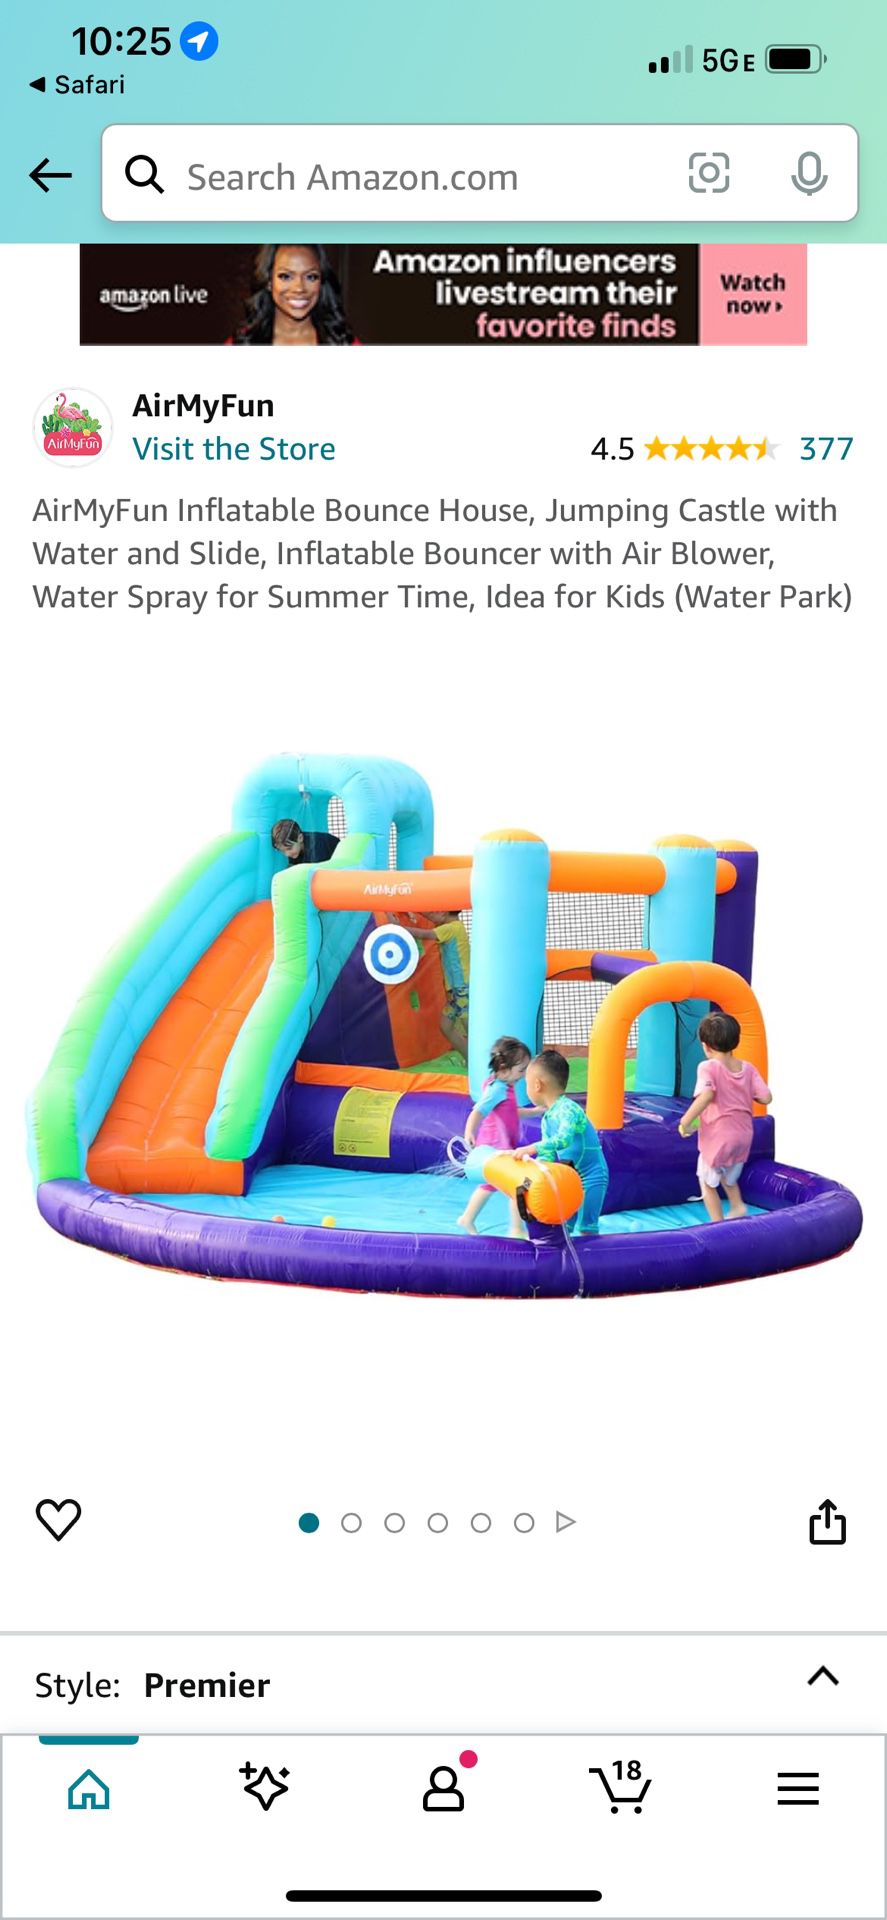 AirMyFun Inflatable Bounce House, Jumping Castle with Water and Slide, Inflatable Bouncer with Air Blower, Water Spray for Summer Time, Idea for Kids 